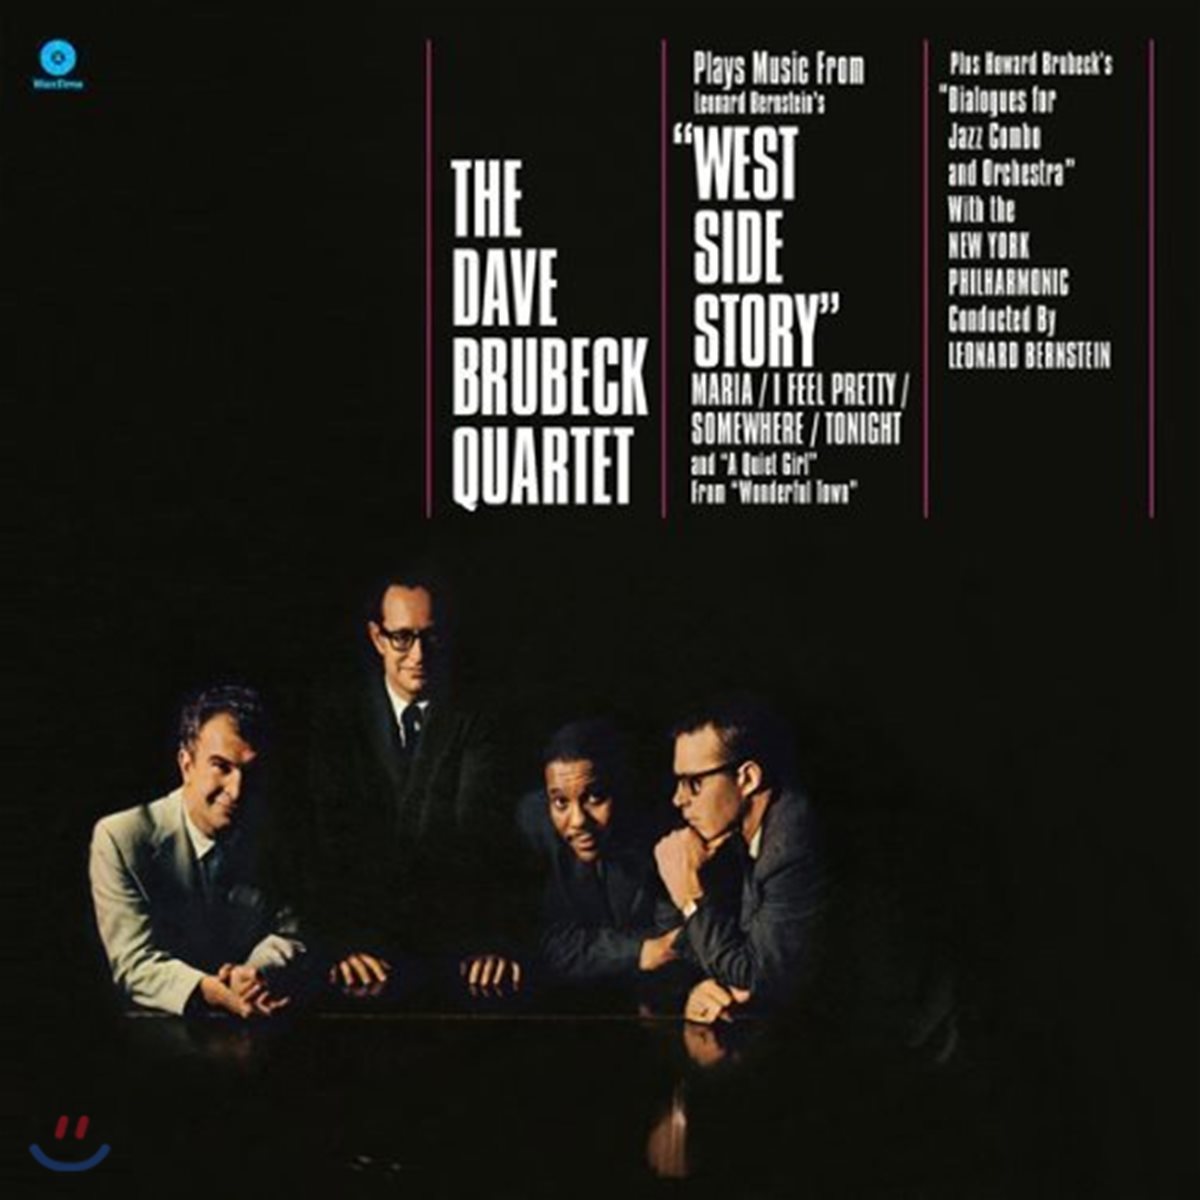 The Dave Brubeck Quartet - Plays Music from "West Side Story" And Other Works